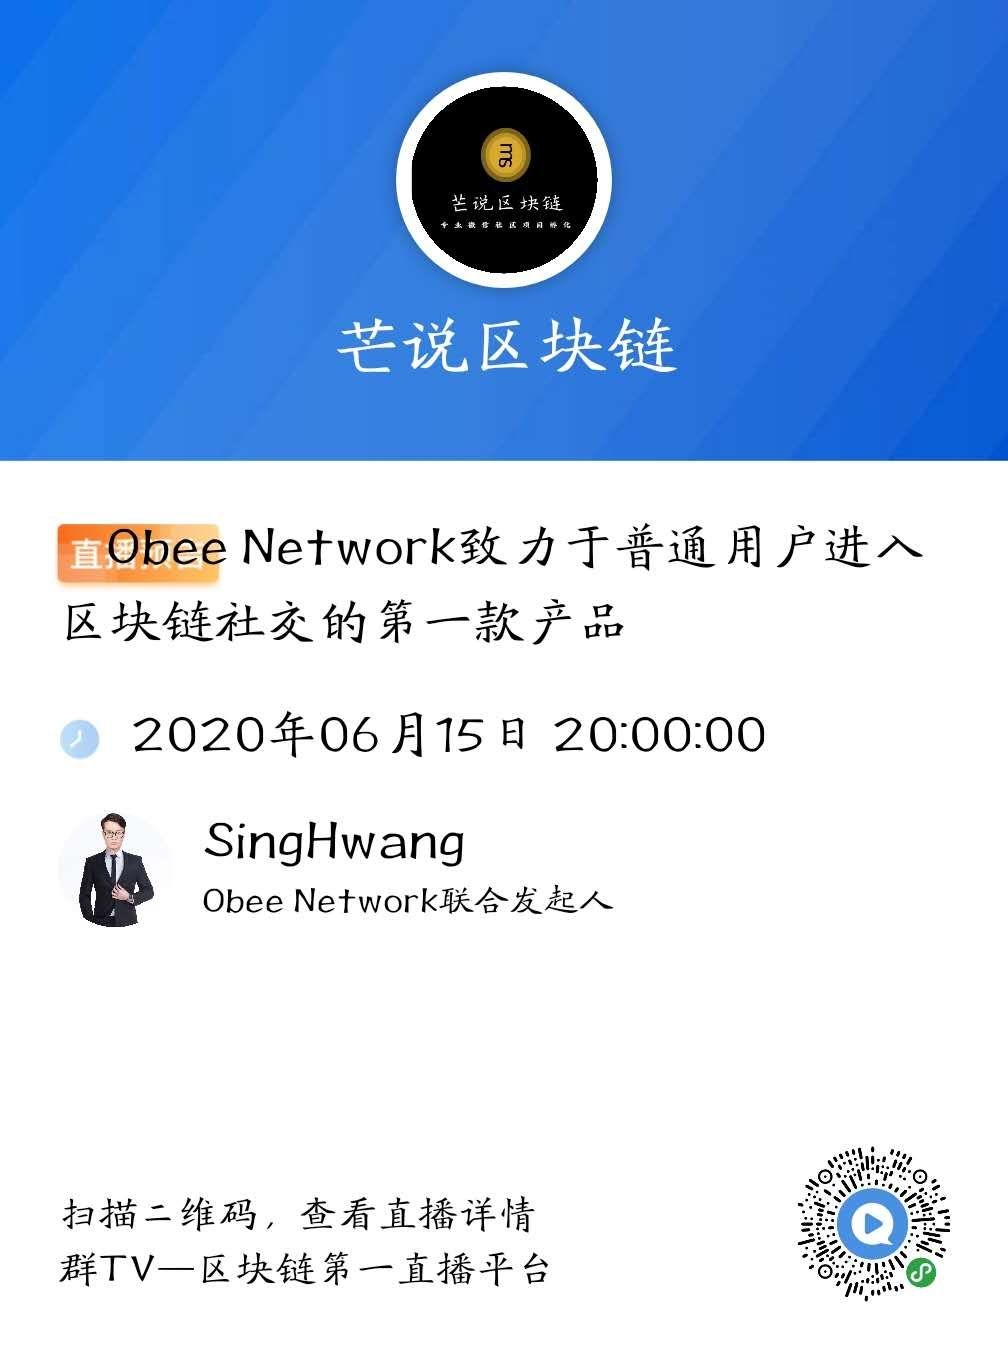 Obee Network New AMA